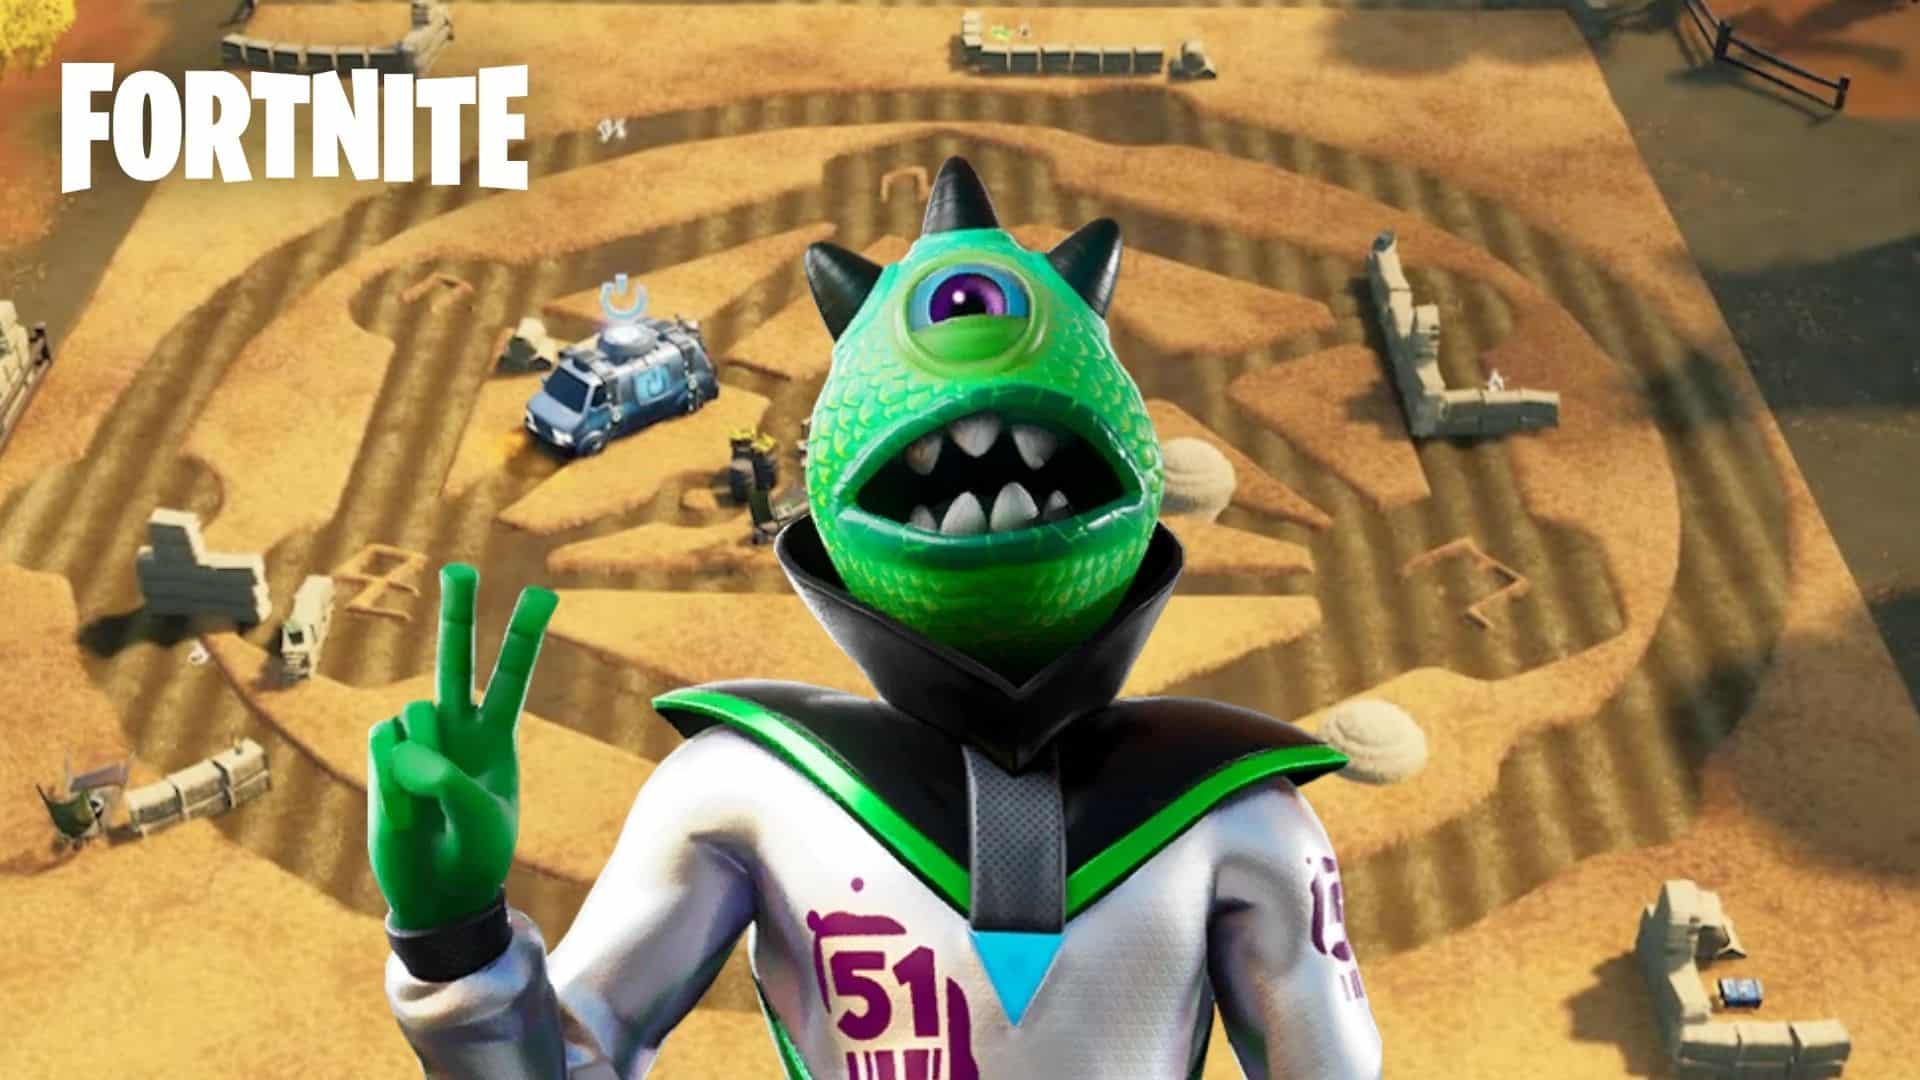 Alien in crop circles on Fortnite map